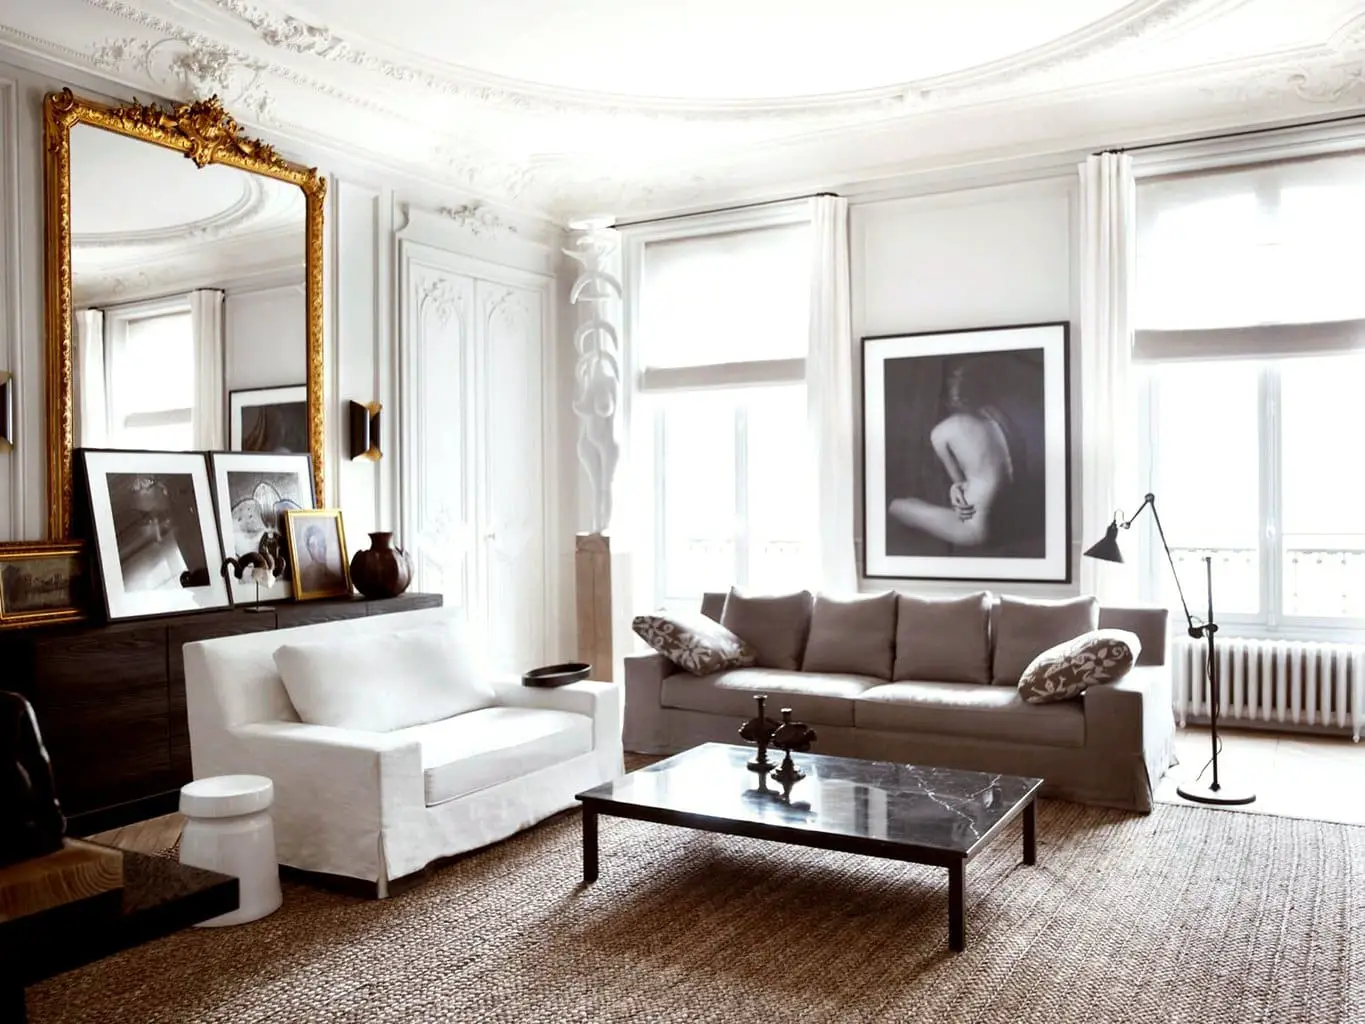 Cutting-Edge Classicism in Parisian Flat via Gilles & Boissier on Thou Swell | https://thouswell.com/cutting-edge-classicism-in-parisian-flat